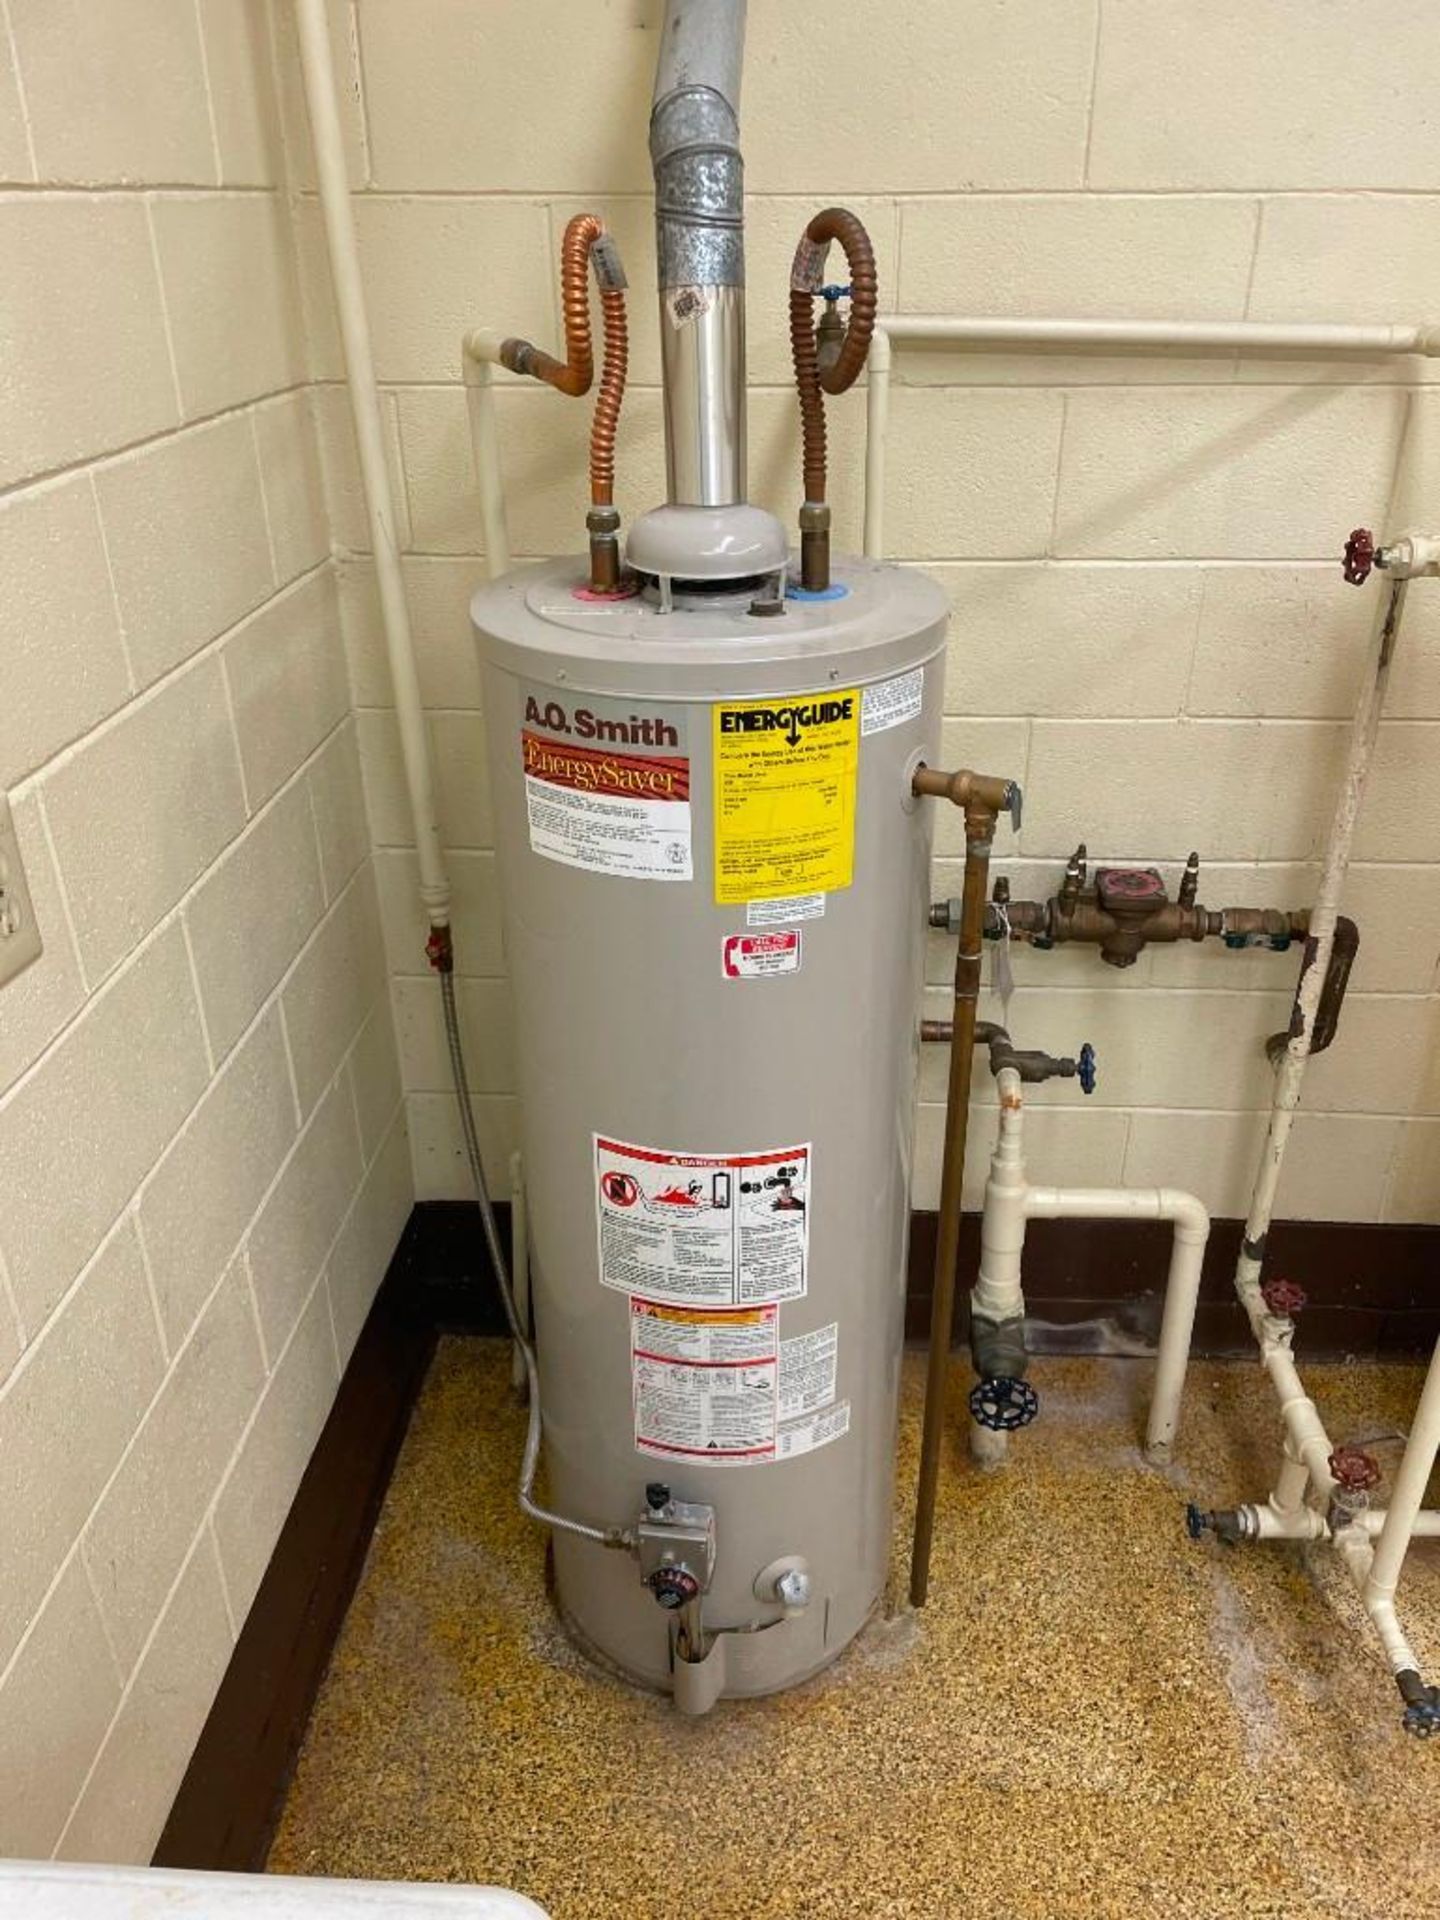 A.O. Smith Energy Saver Water Heater - Image 2 of 5